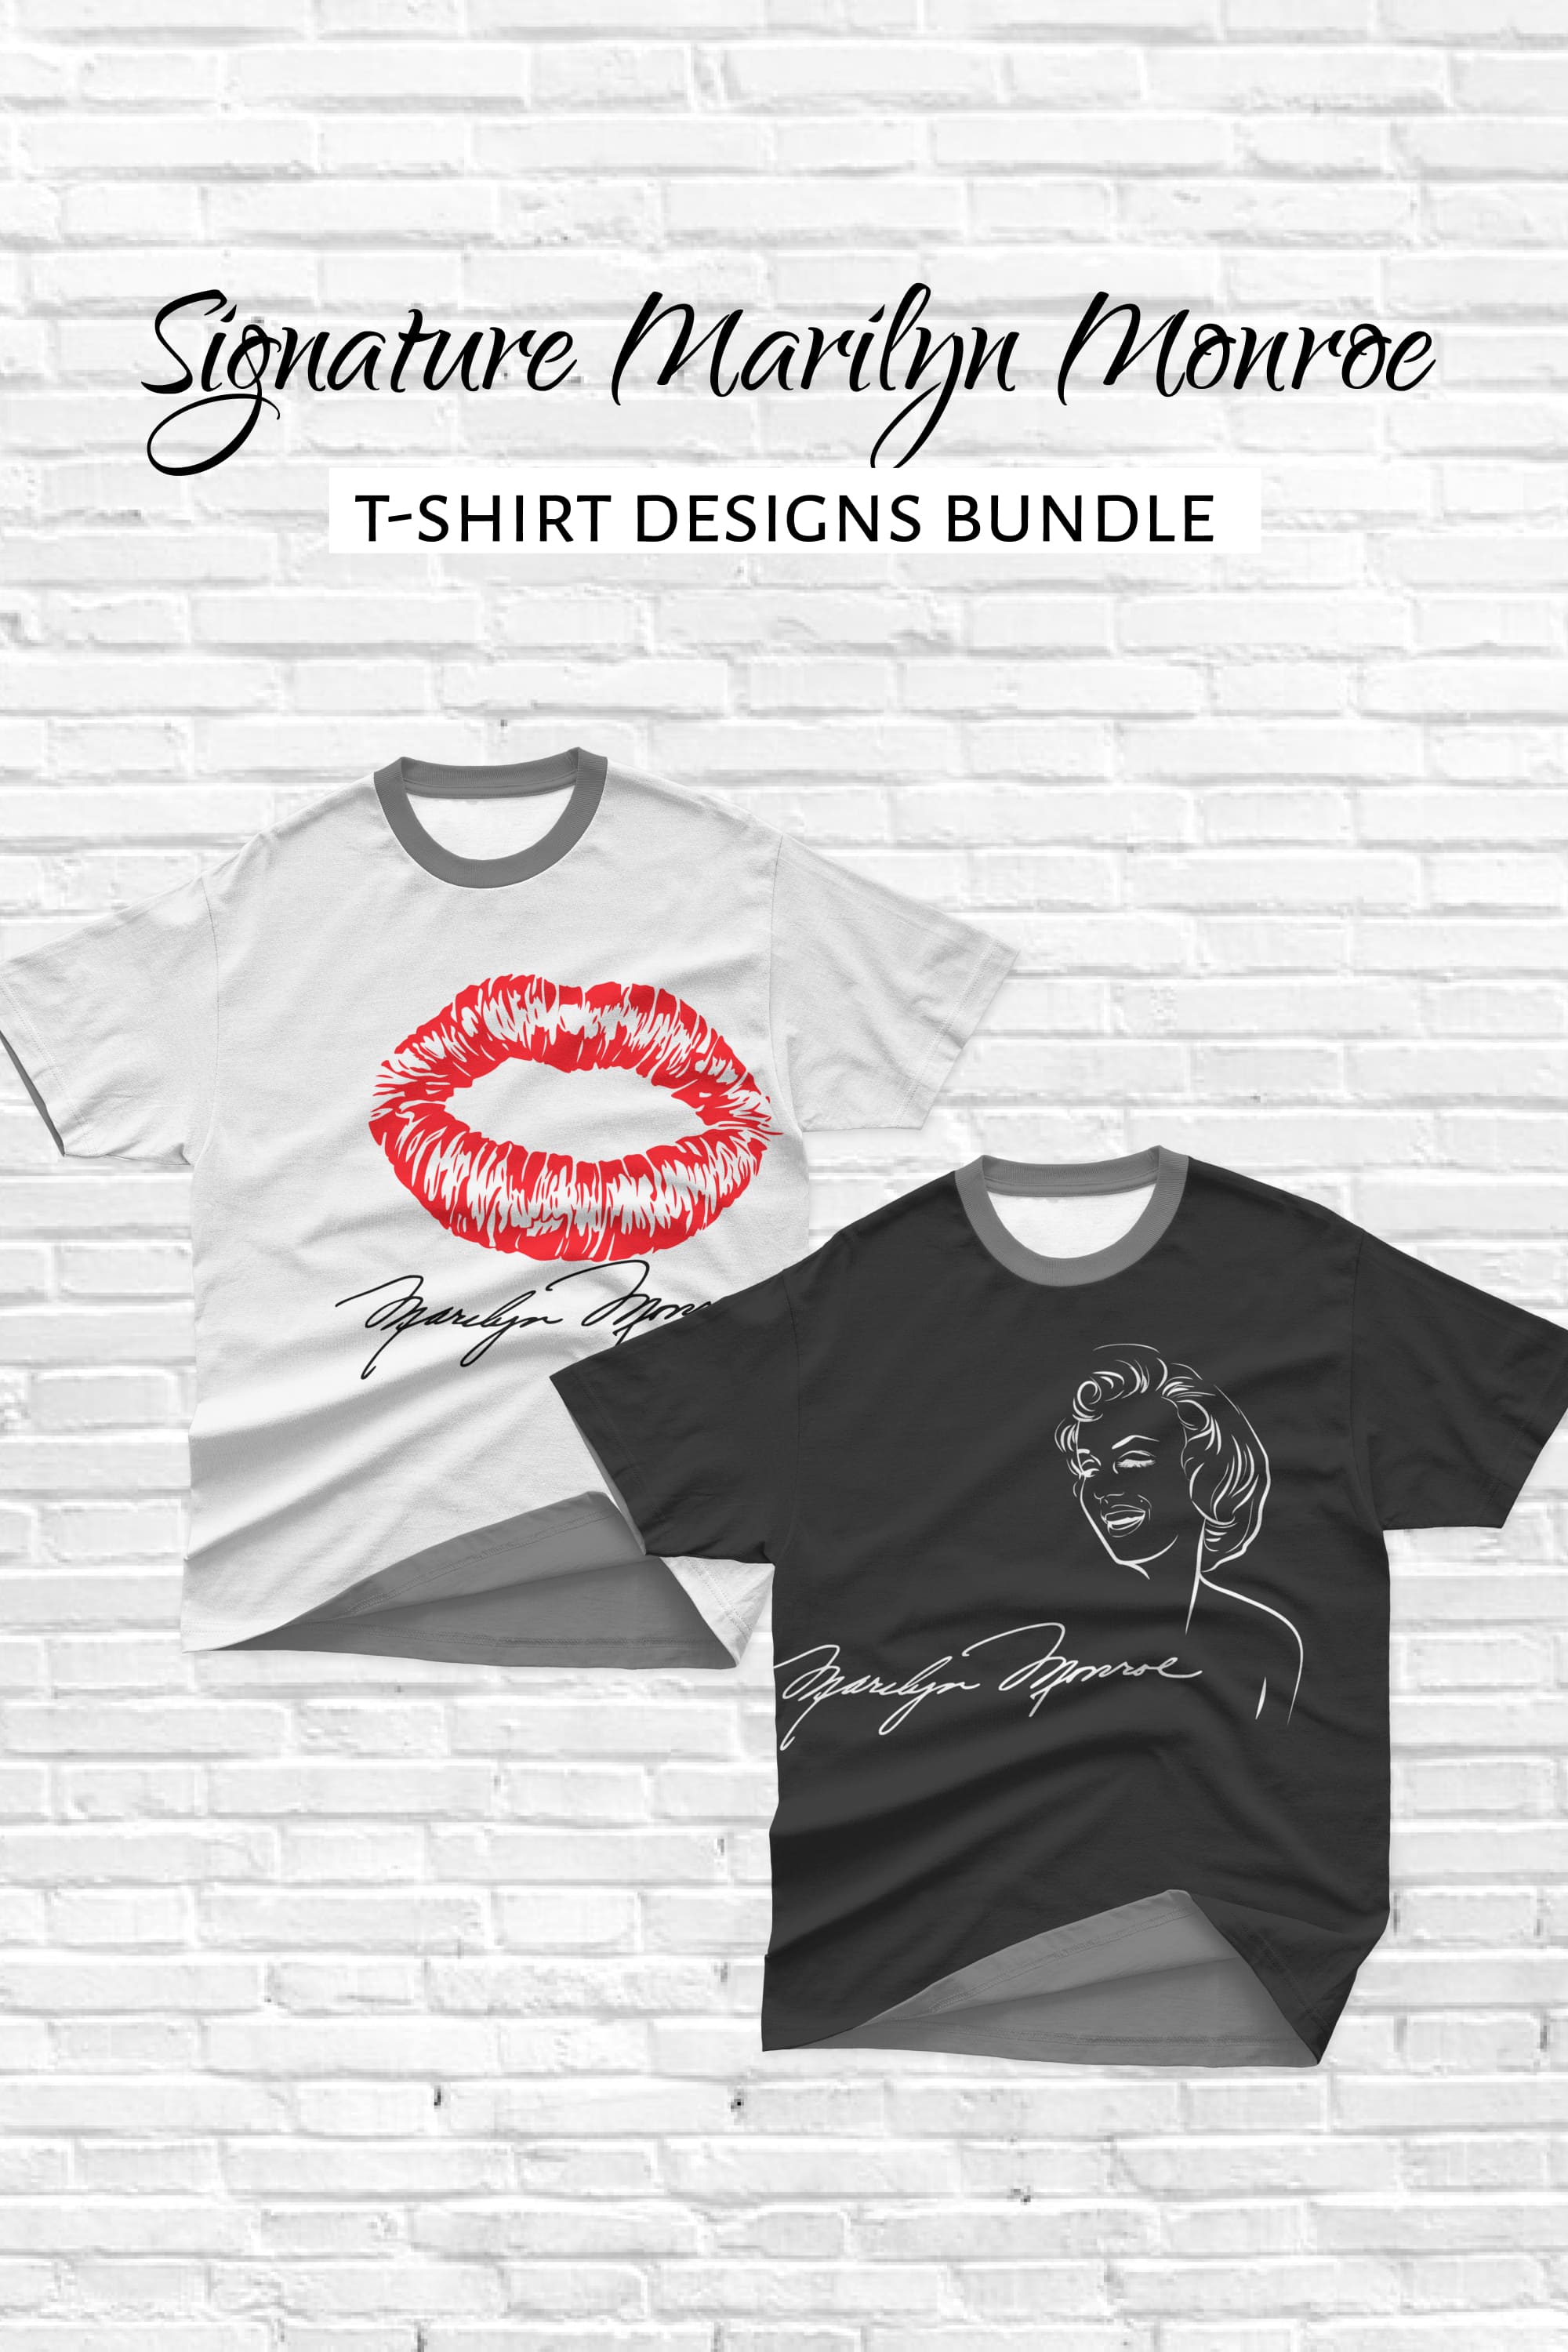 Pack of images of t-shirts with a cute print of Marilyn Monroe's signature.